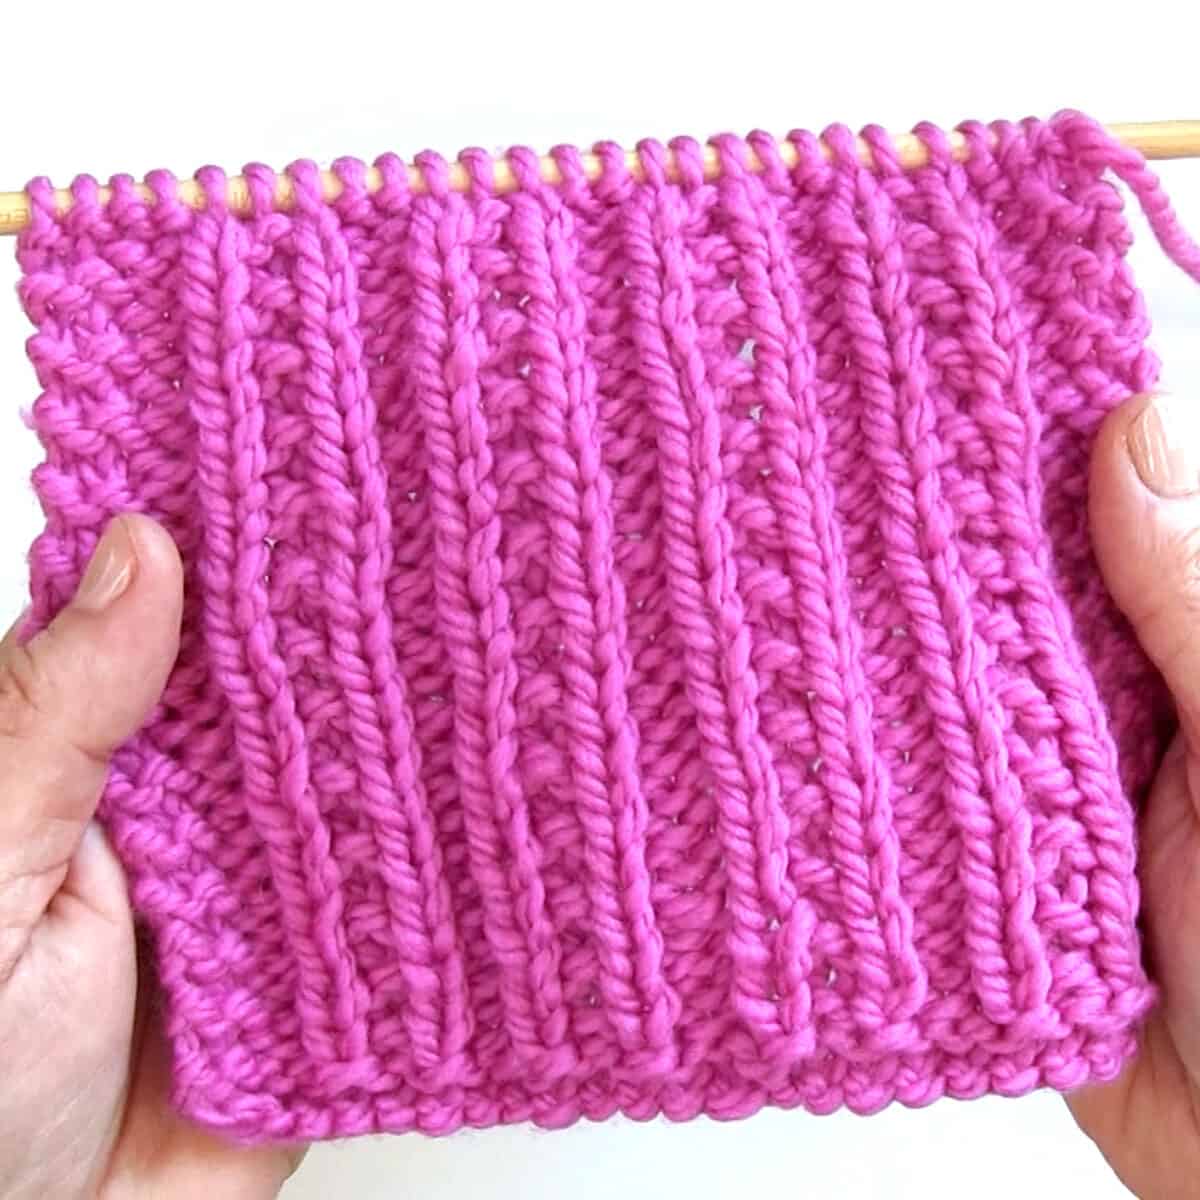 Beaded Rib Stitch Pattern knitted swatch in pink color yarn.